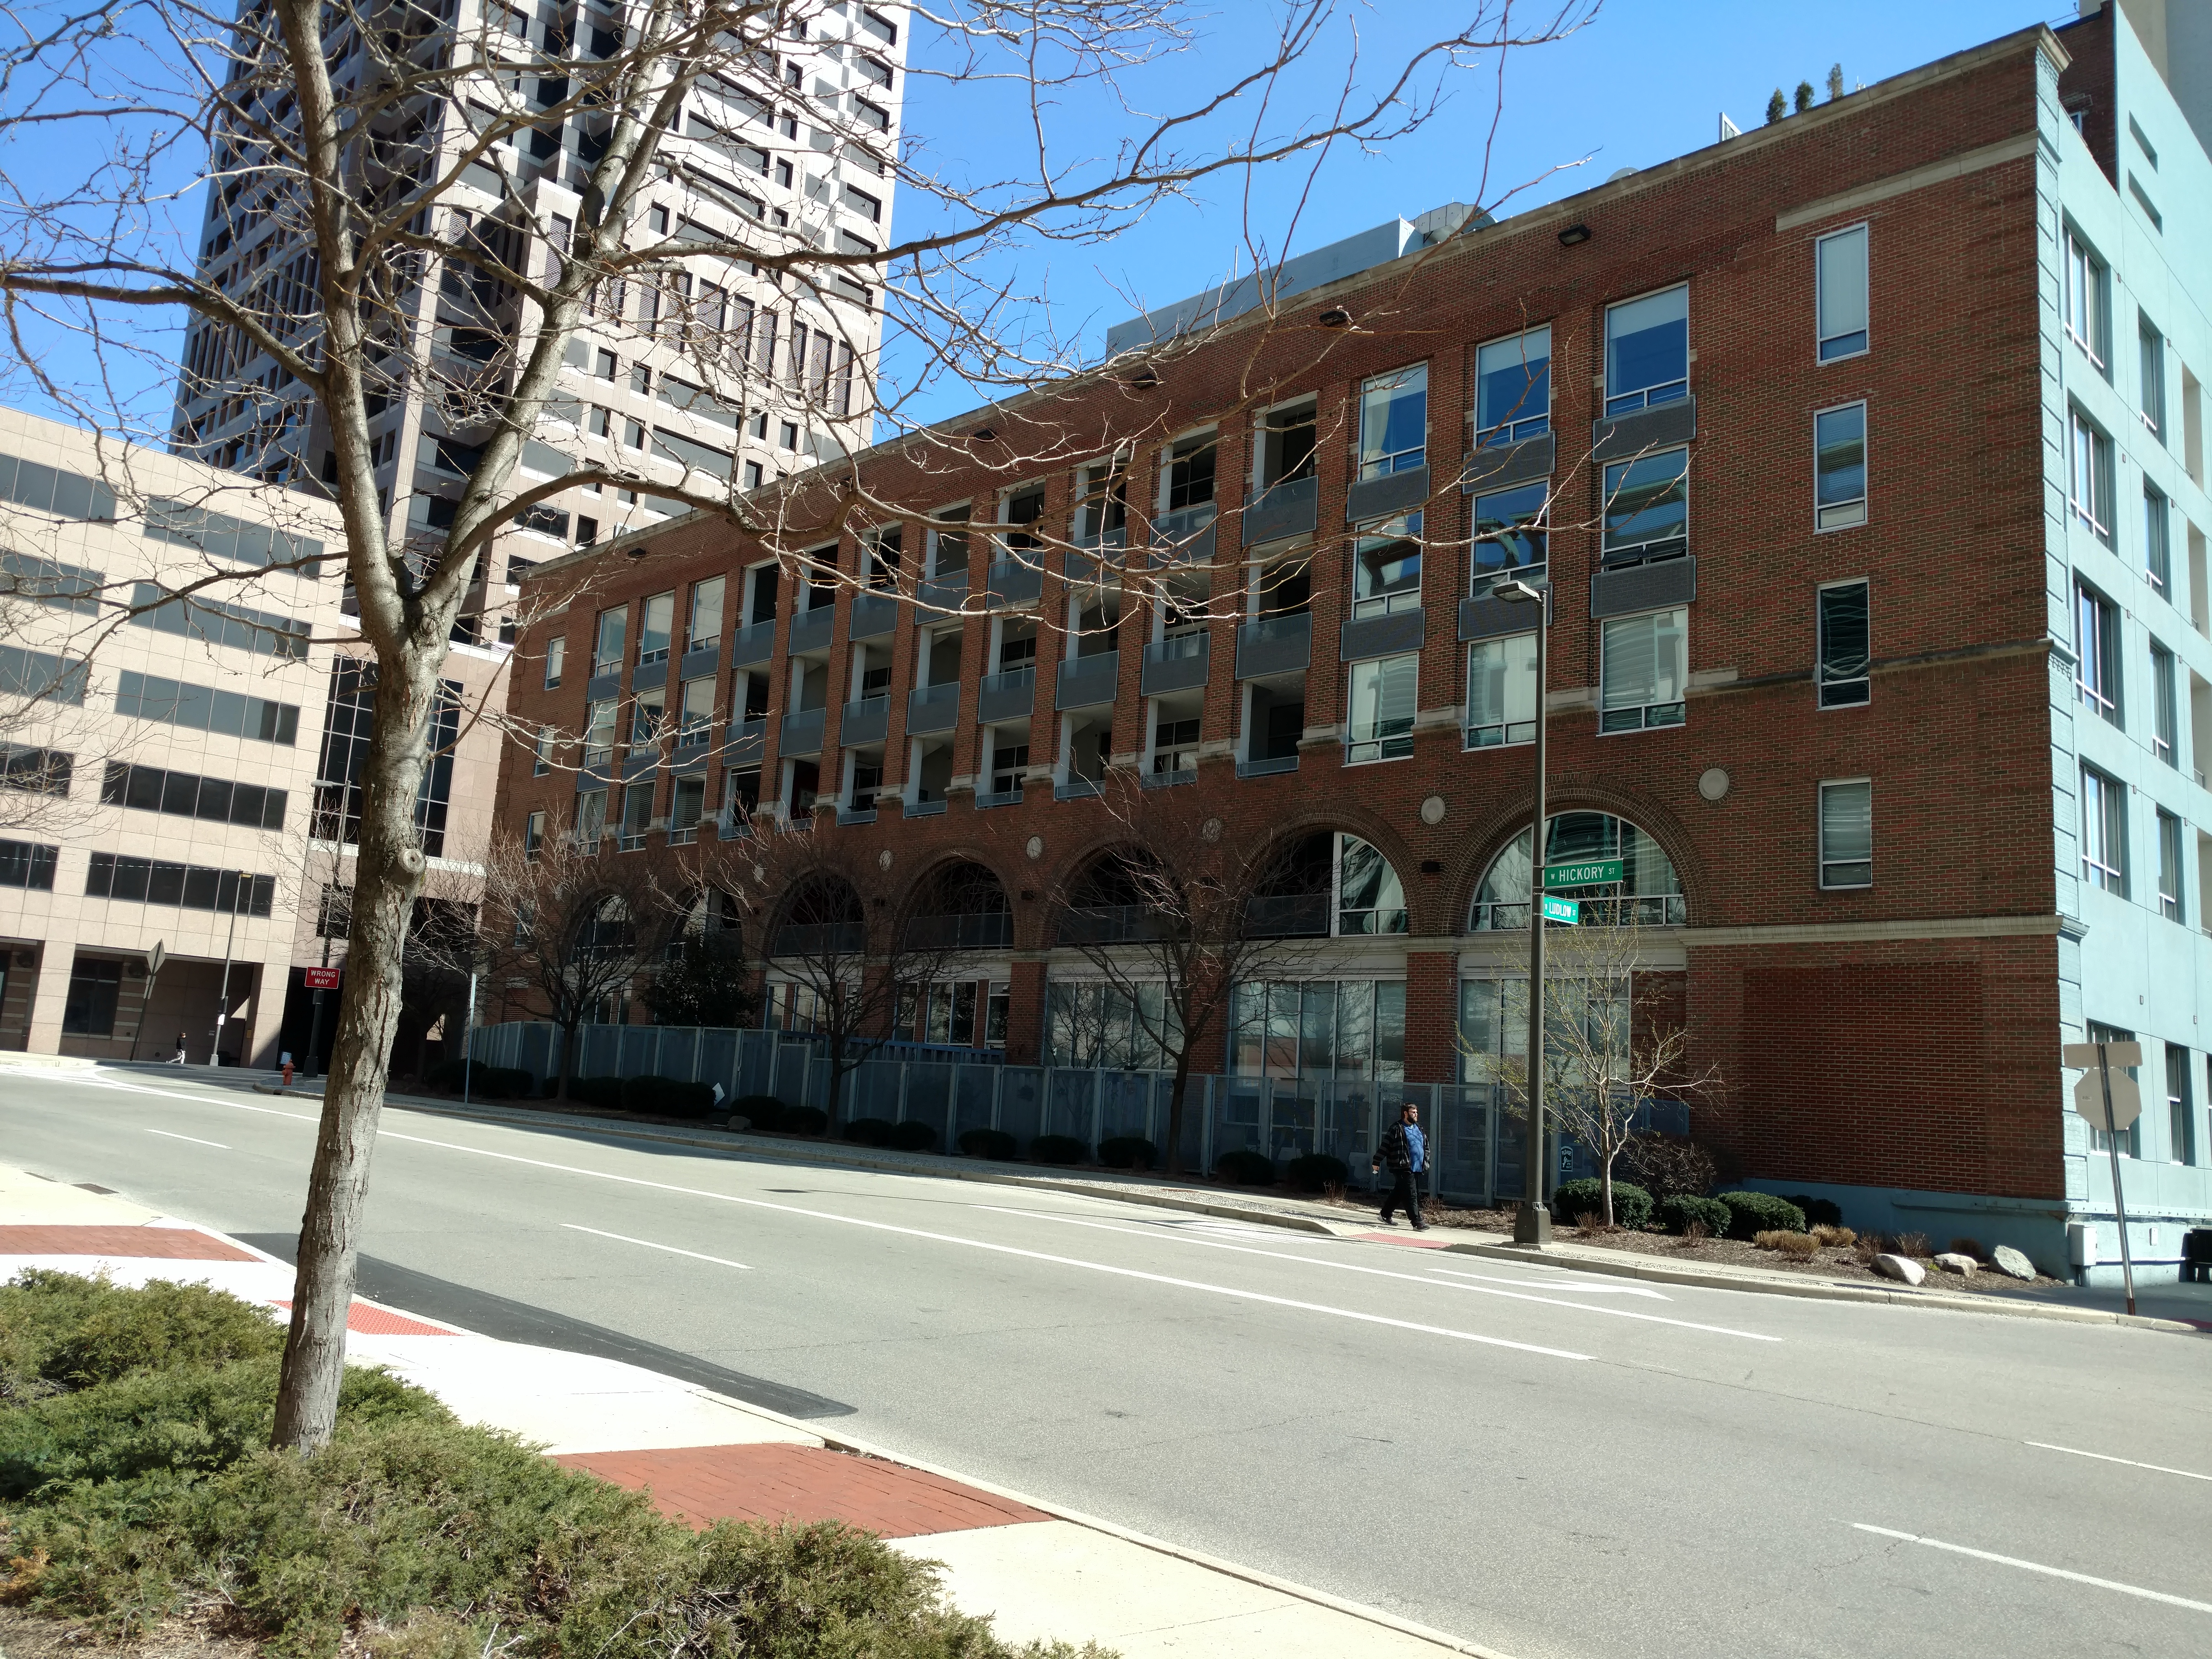 Picture of 221 N Front Street Arena District Loft condominiums with patios and balconies